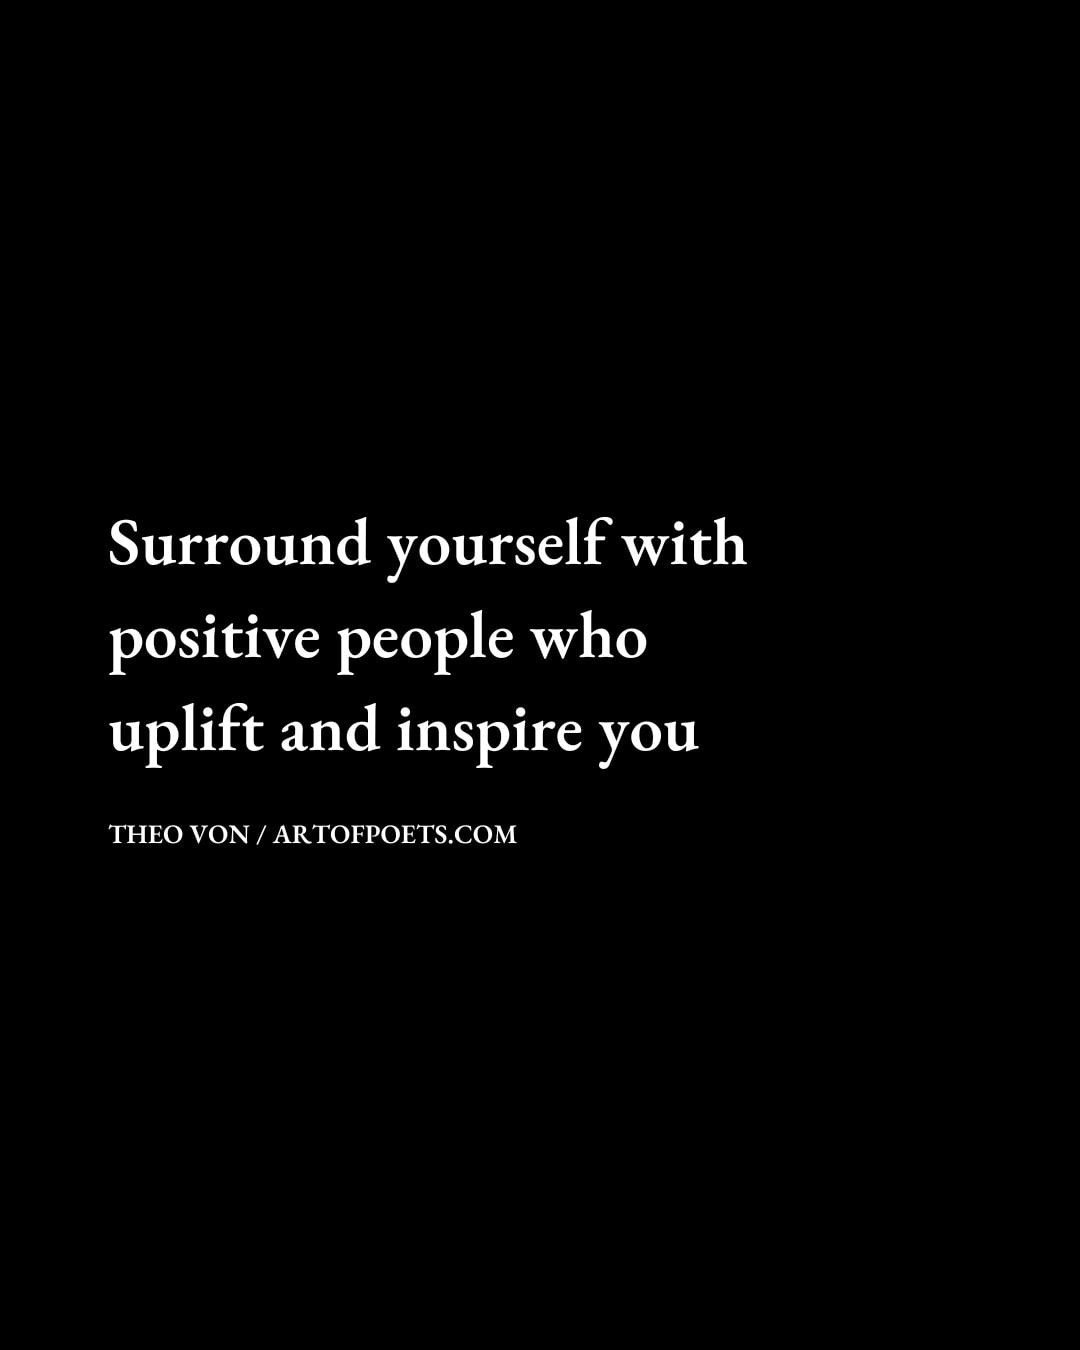 Surround yourself with positive people who uplift and inspire you